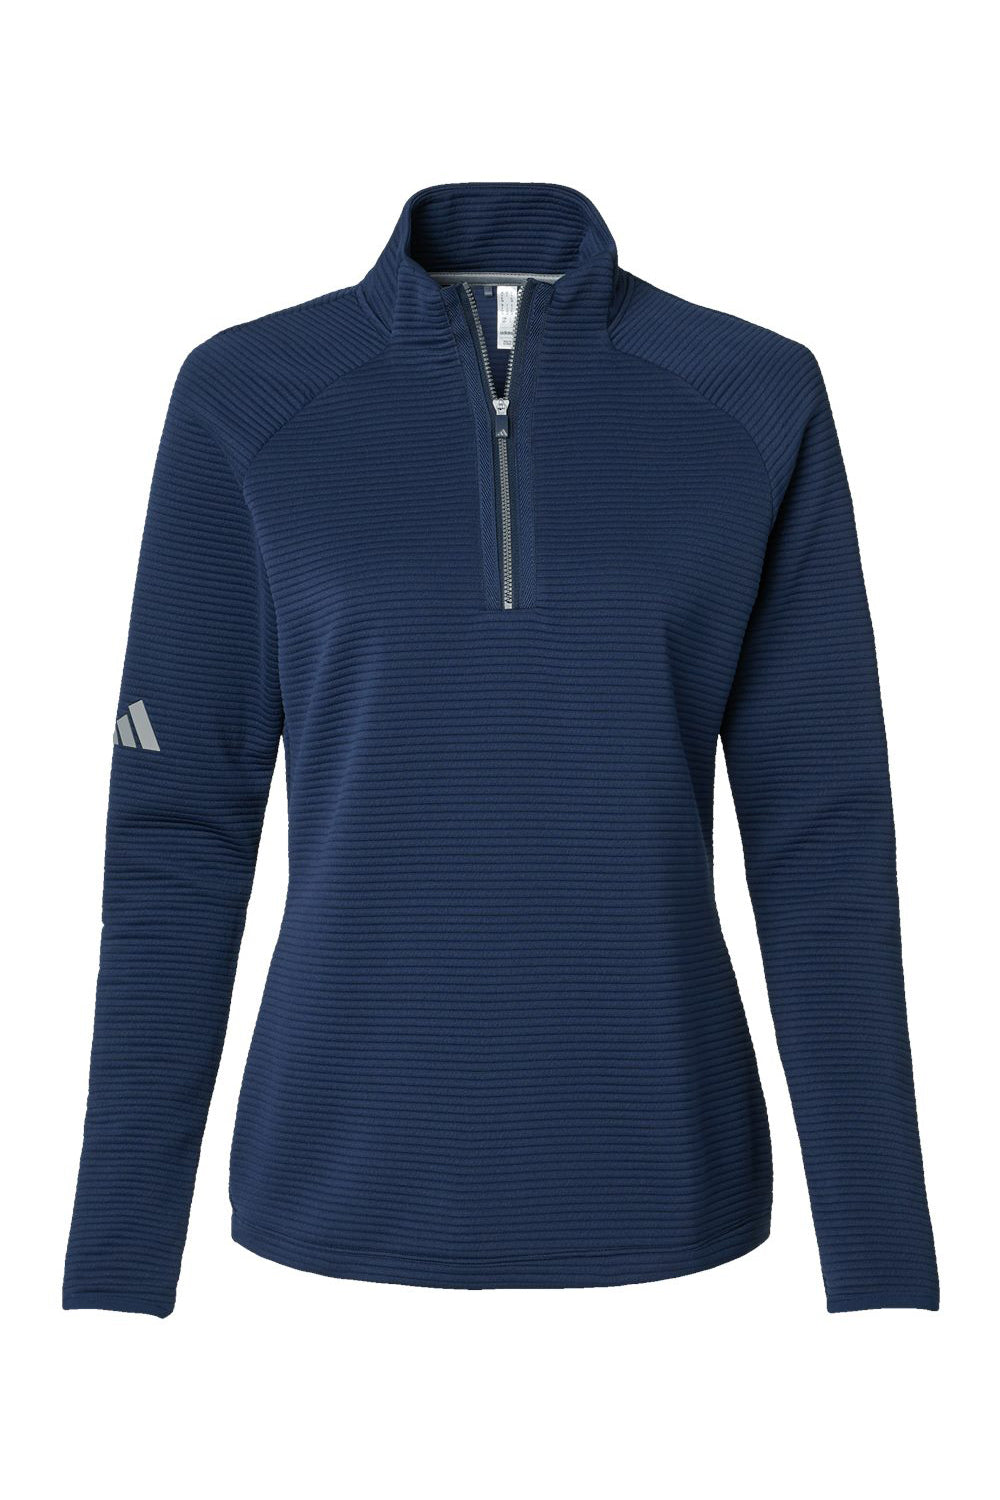 Adidas A589 Womens Spacer 1/4 Zip Pullover Collegiate Navy Blue Flat Front